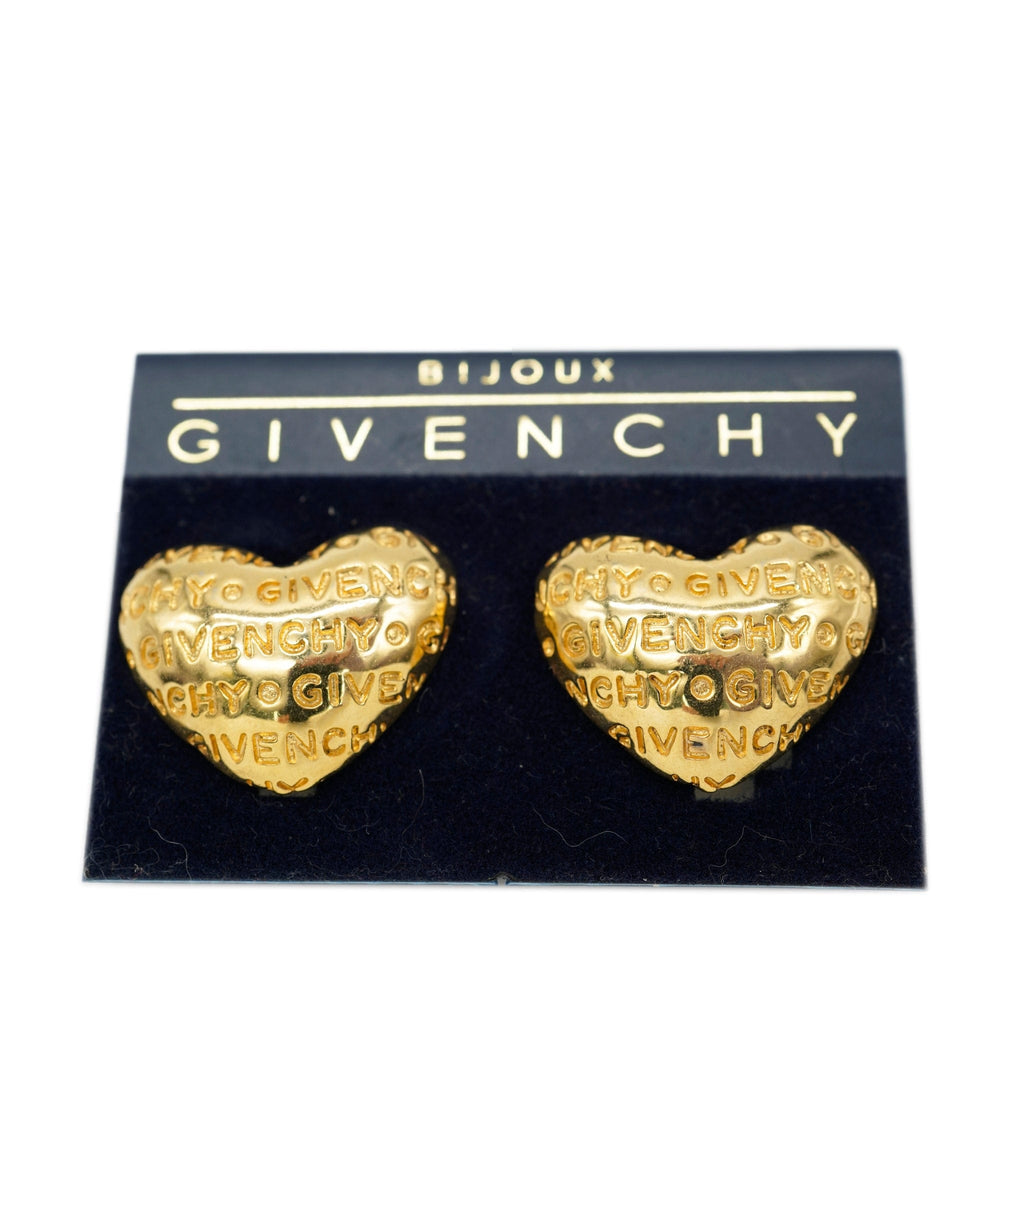 Givenchy gold metallic heart earrings | Browns